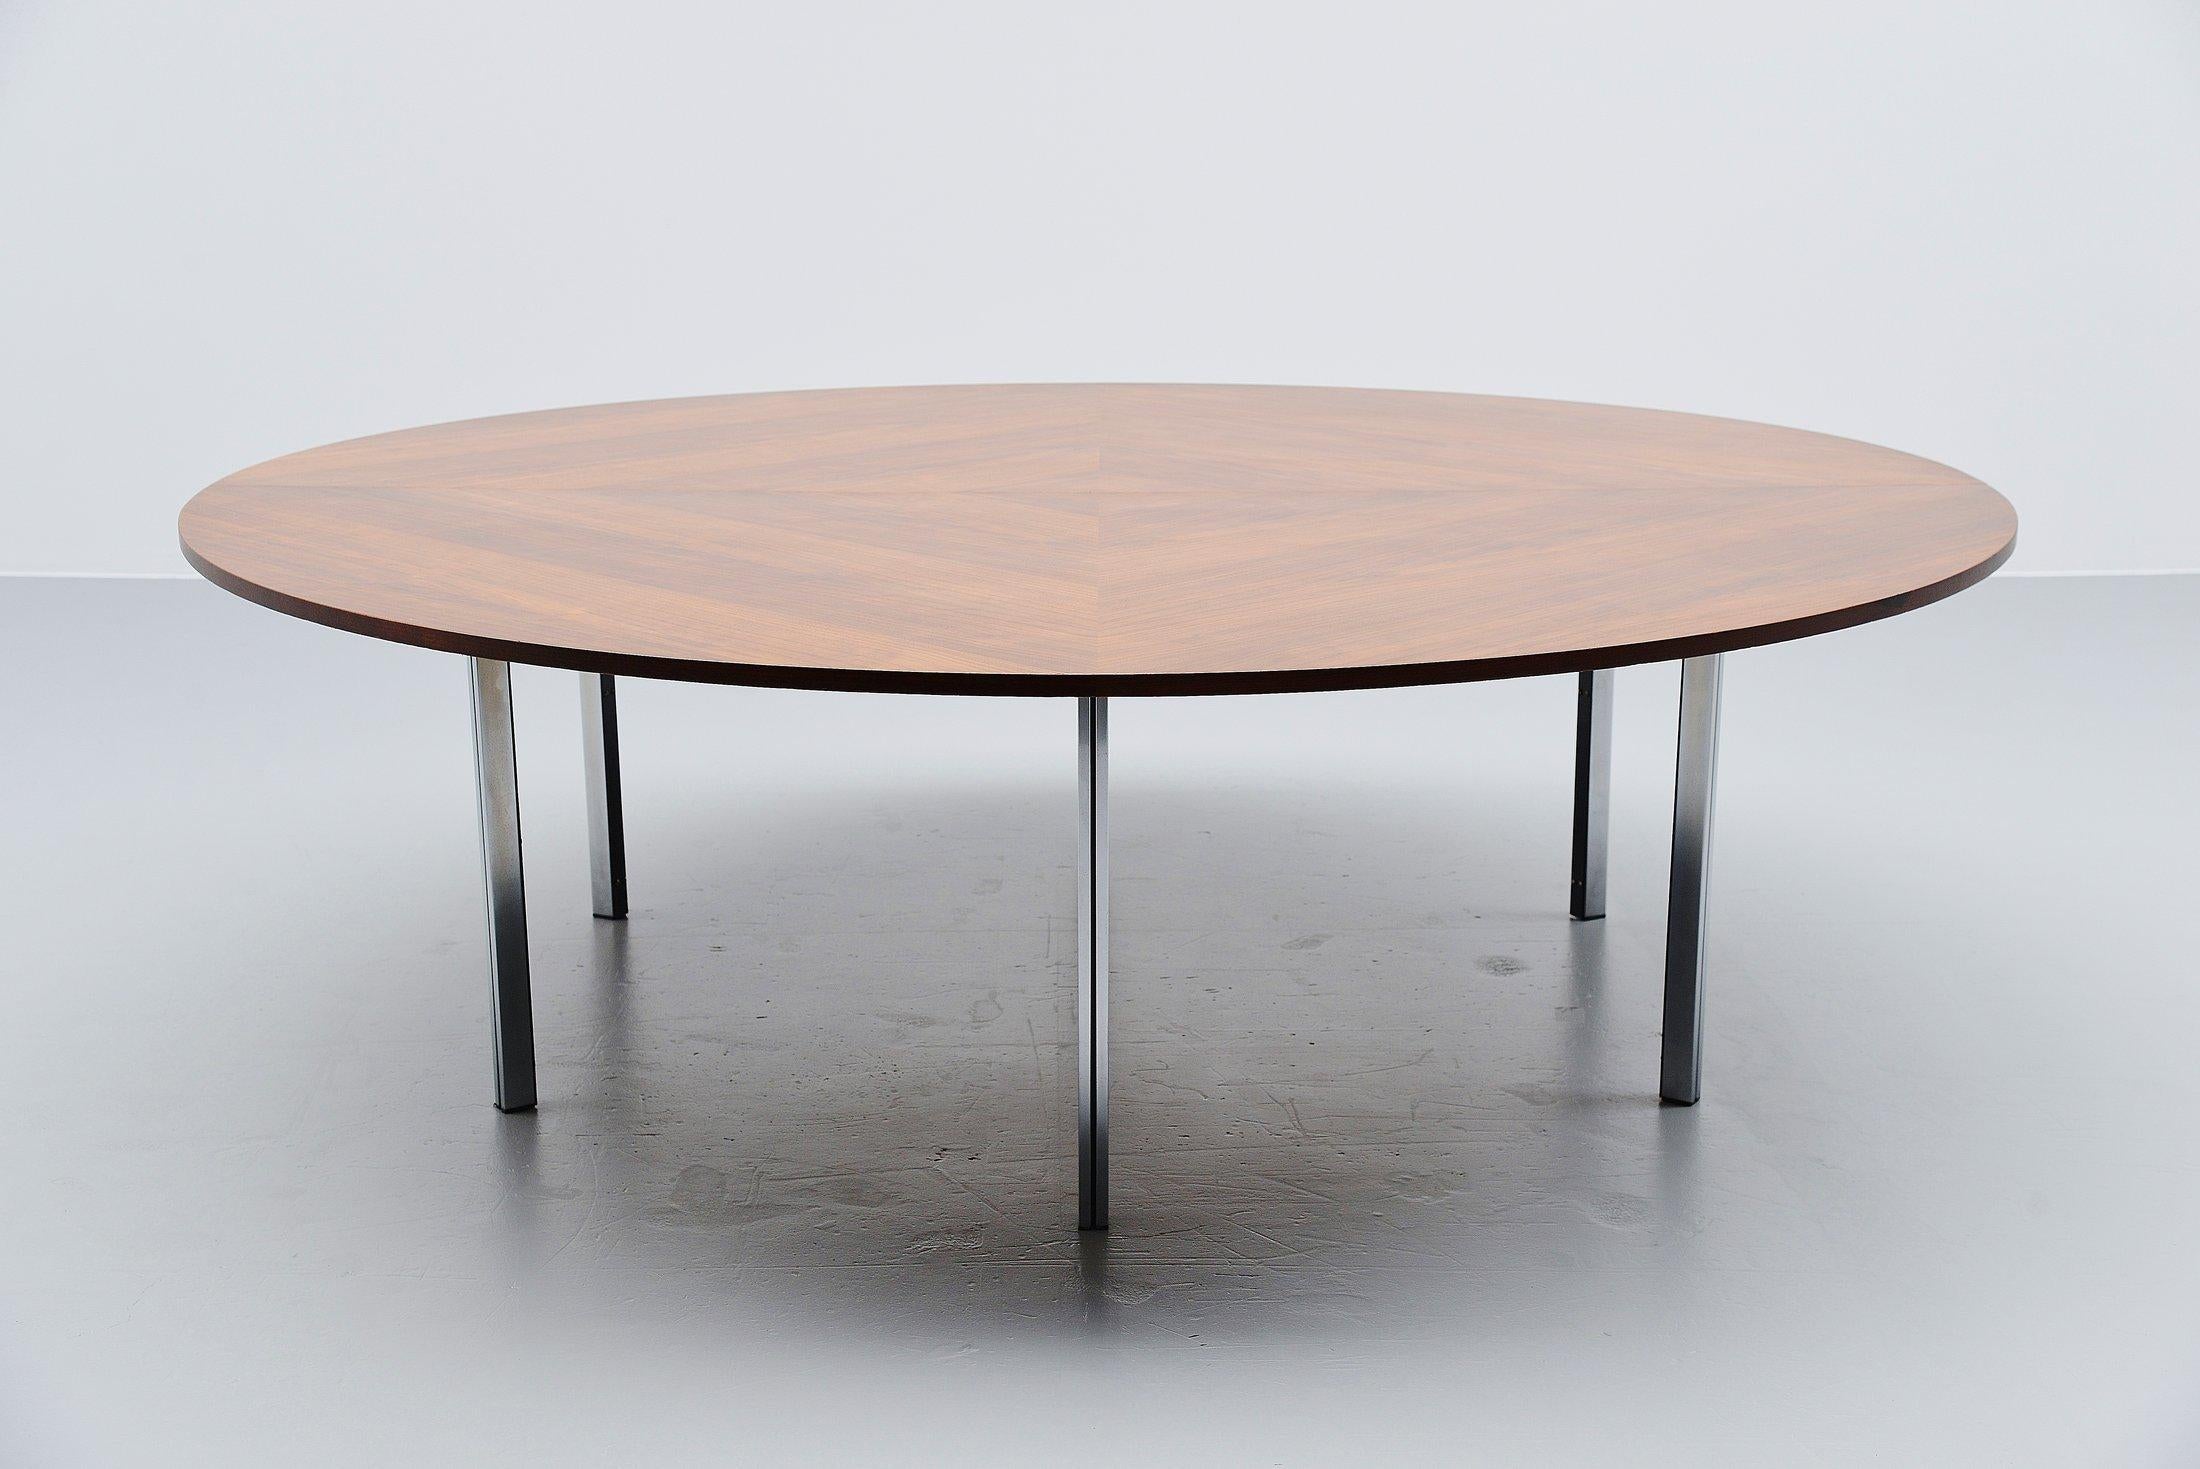 Extremely large round conference table made by unknown manufacturer, in the style of Forence Knoll, 1960. The table top is made of walnut veneer and the frame is made if chrome plated metal. This table can use up to 10 chairs easily. Very nice and